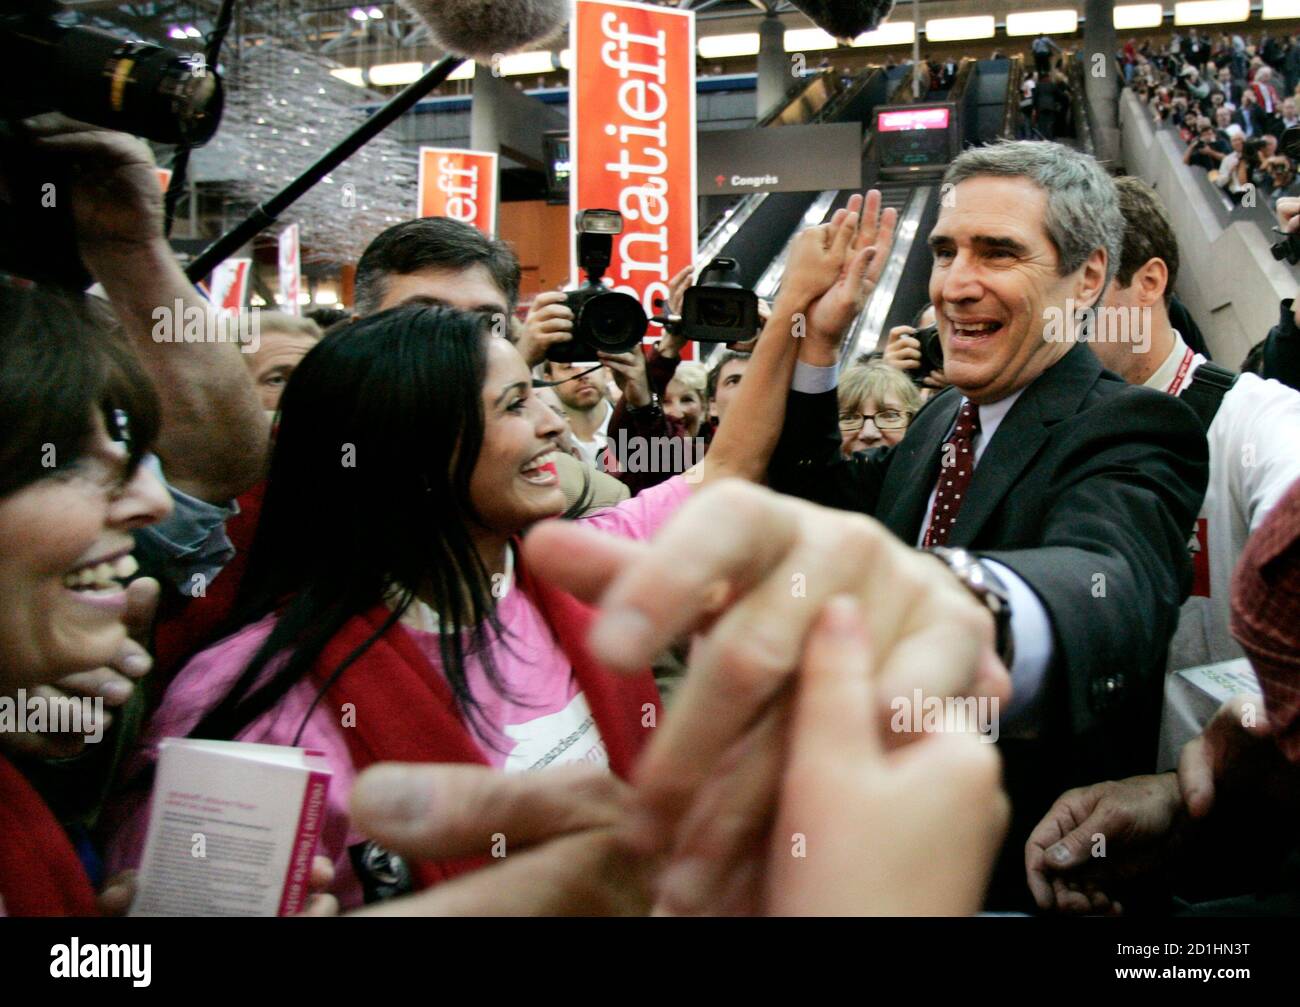 Liberal leadership candidate Michael Ignatieff greets supporters at the party convention in Montreal November 30, 2006. The Liberals will elect a new leader later in the week.        REUTERS/Chris Wattie    (CANADA) Stock Photo